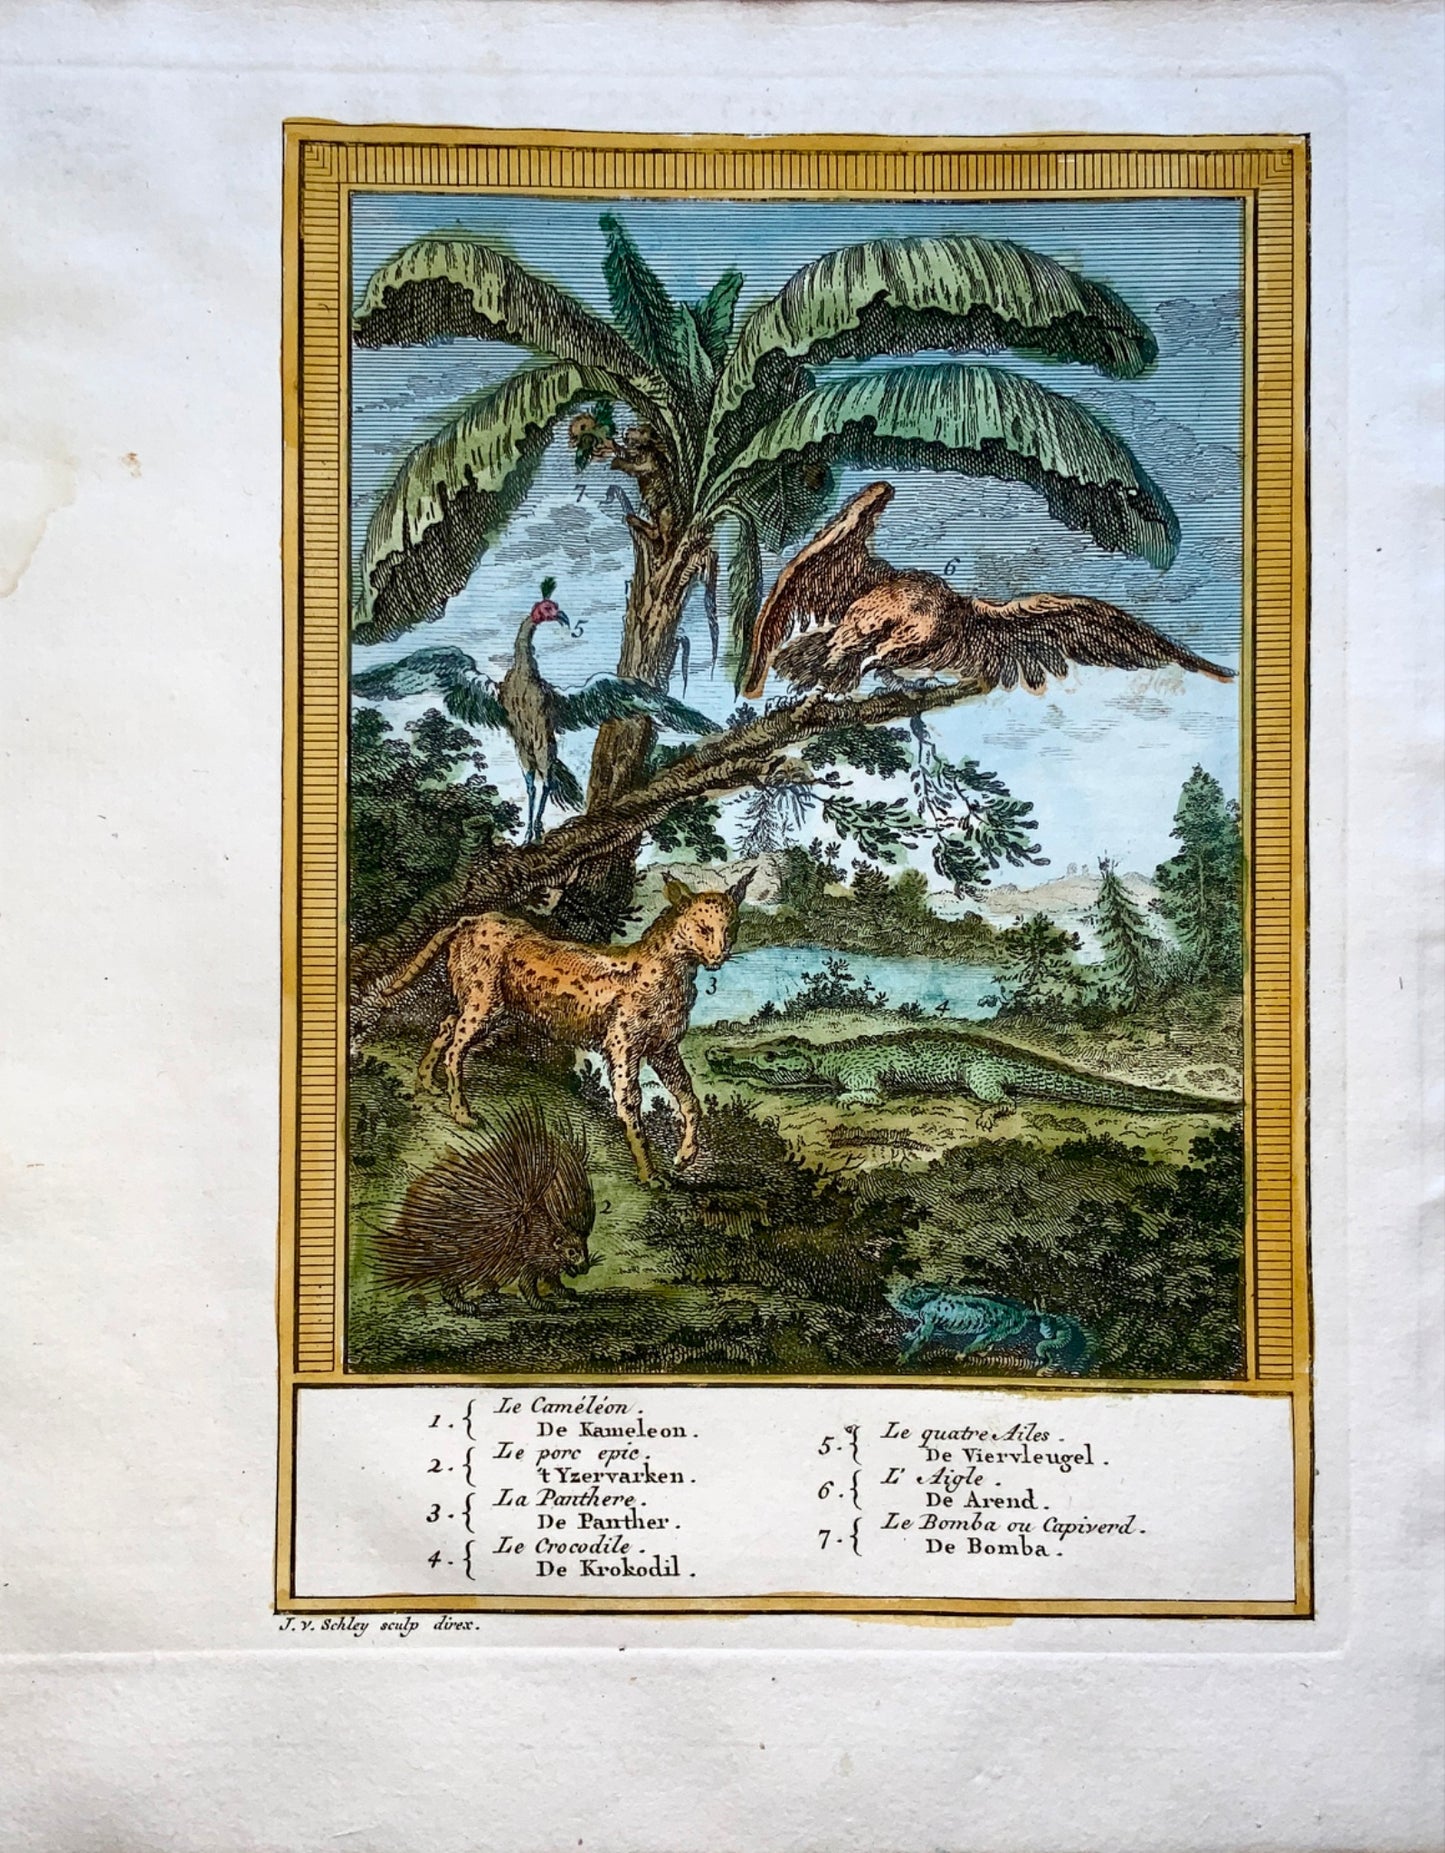 1750 Schley - Cameleon Porcupine Panther Crocodile Minivet - Handcol. Engraving - Zoology